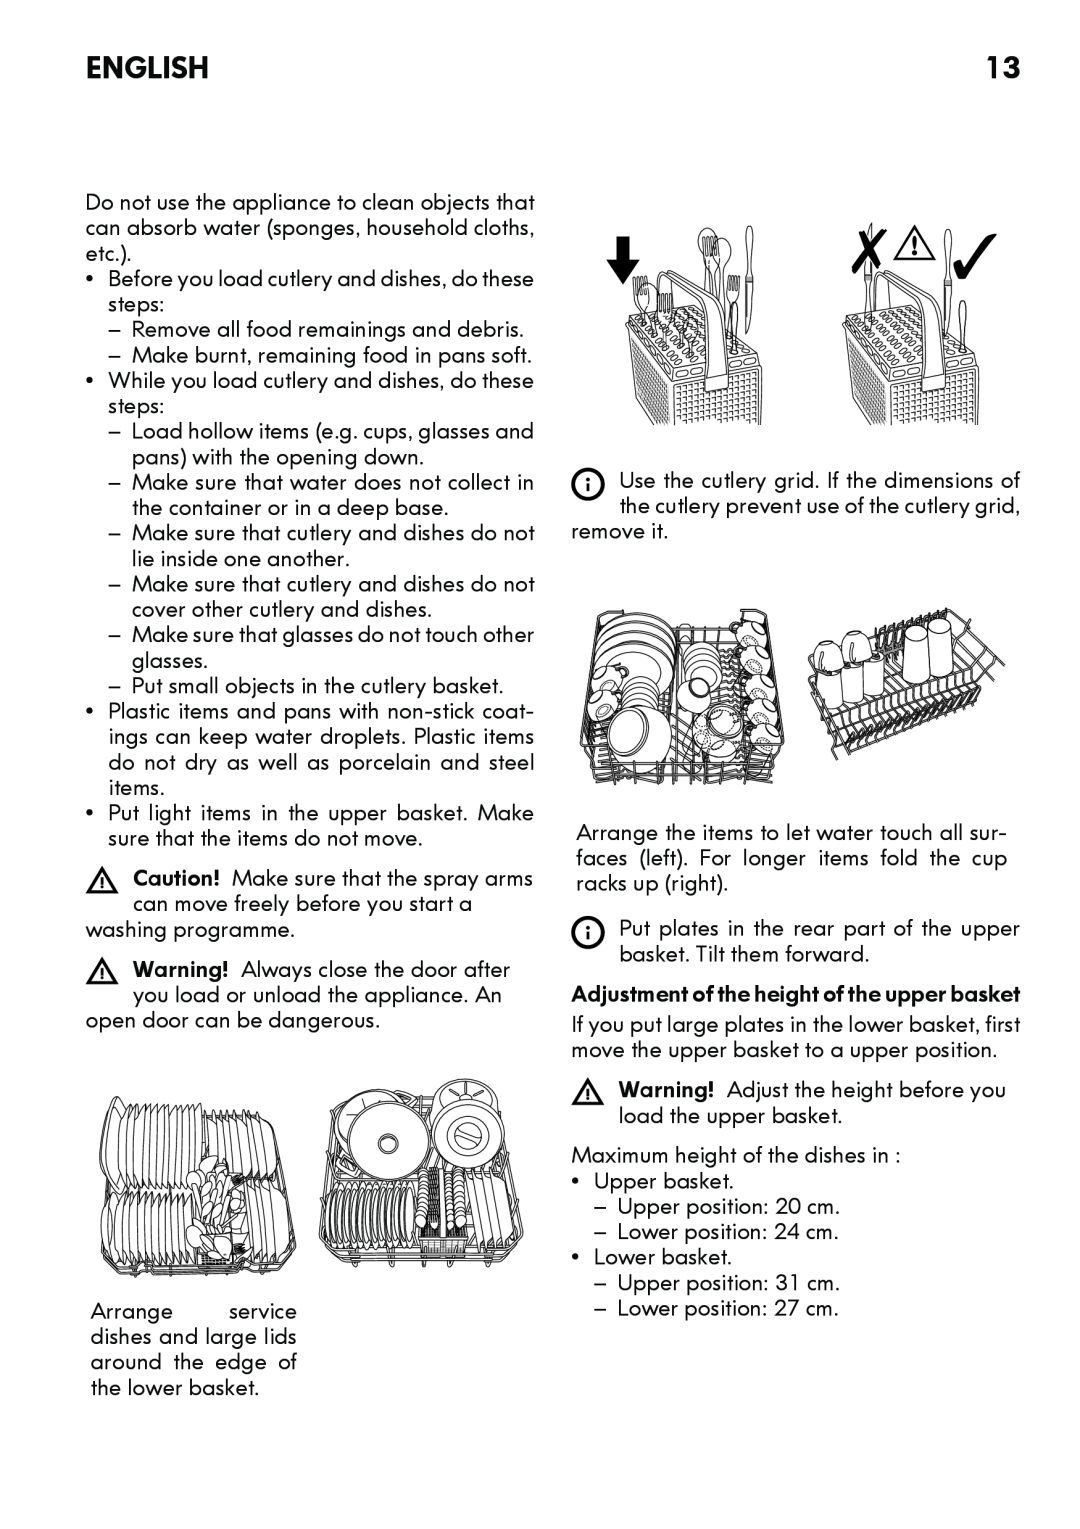 IKEA DW60 manual English, Before you load cutlery and dishes, do these steps 